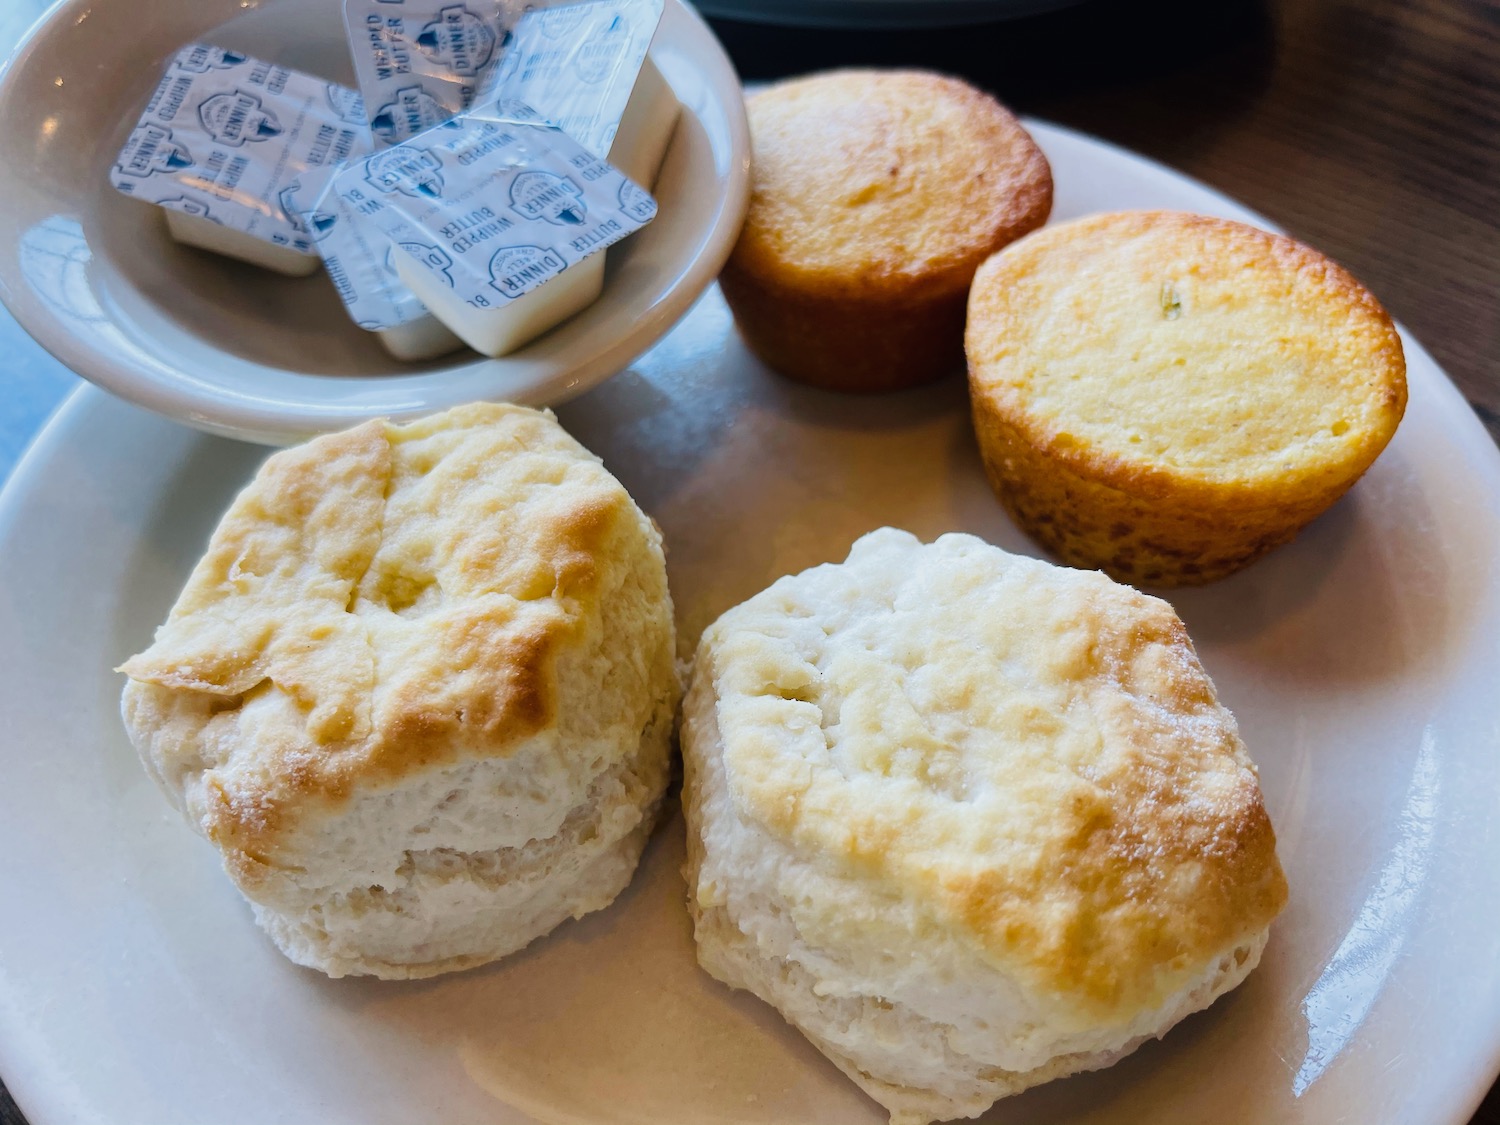 a plate of biscuits and muffins